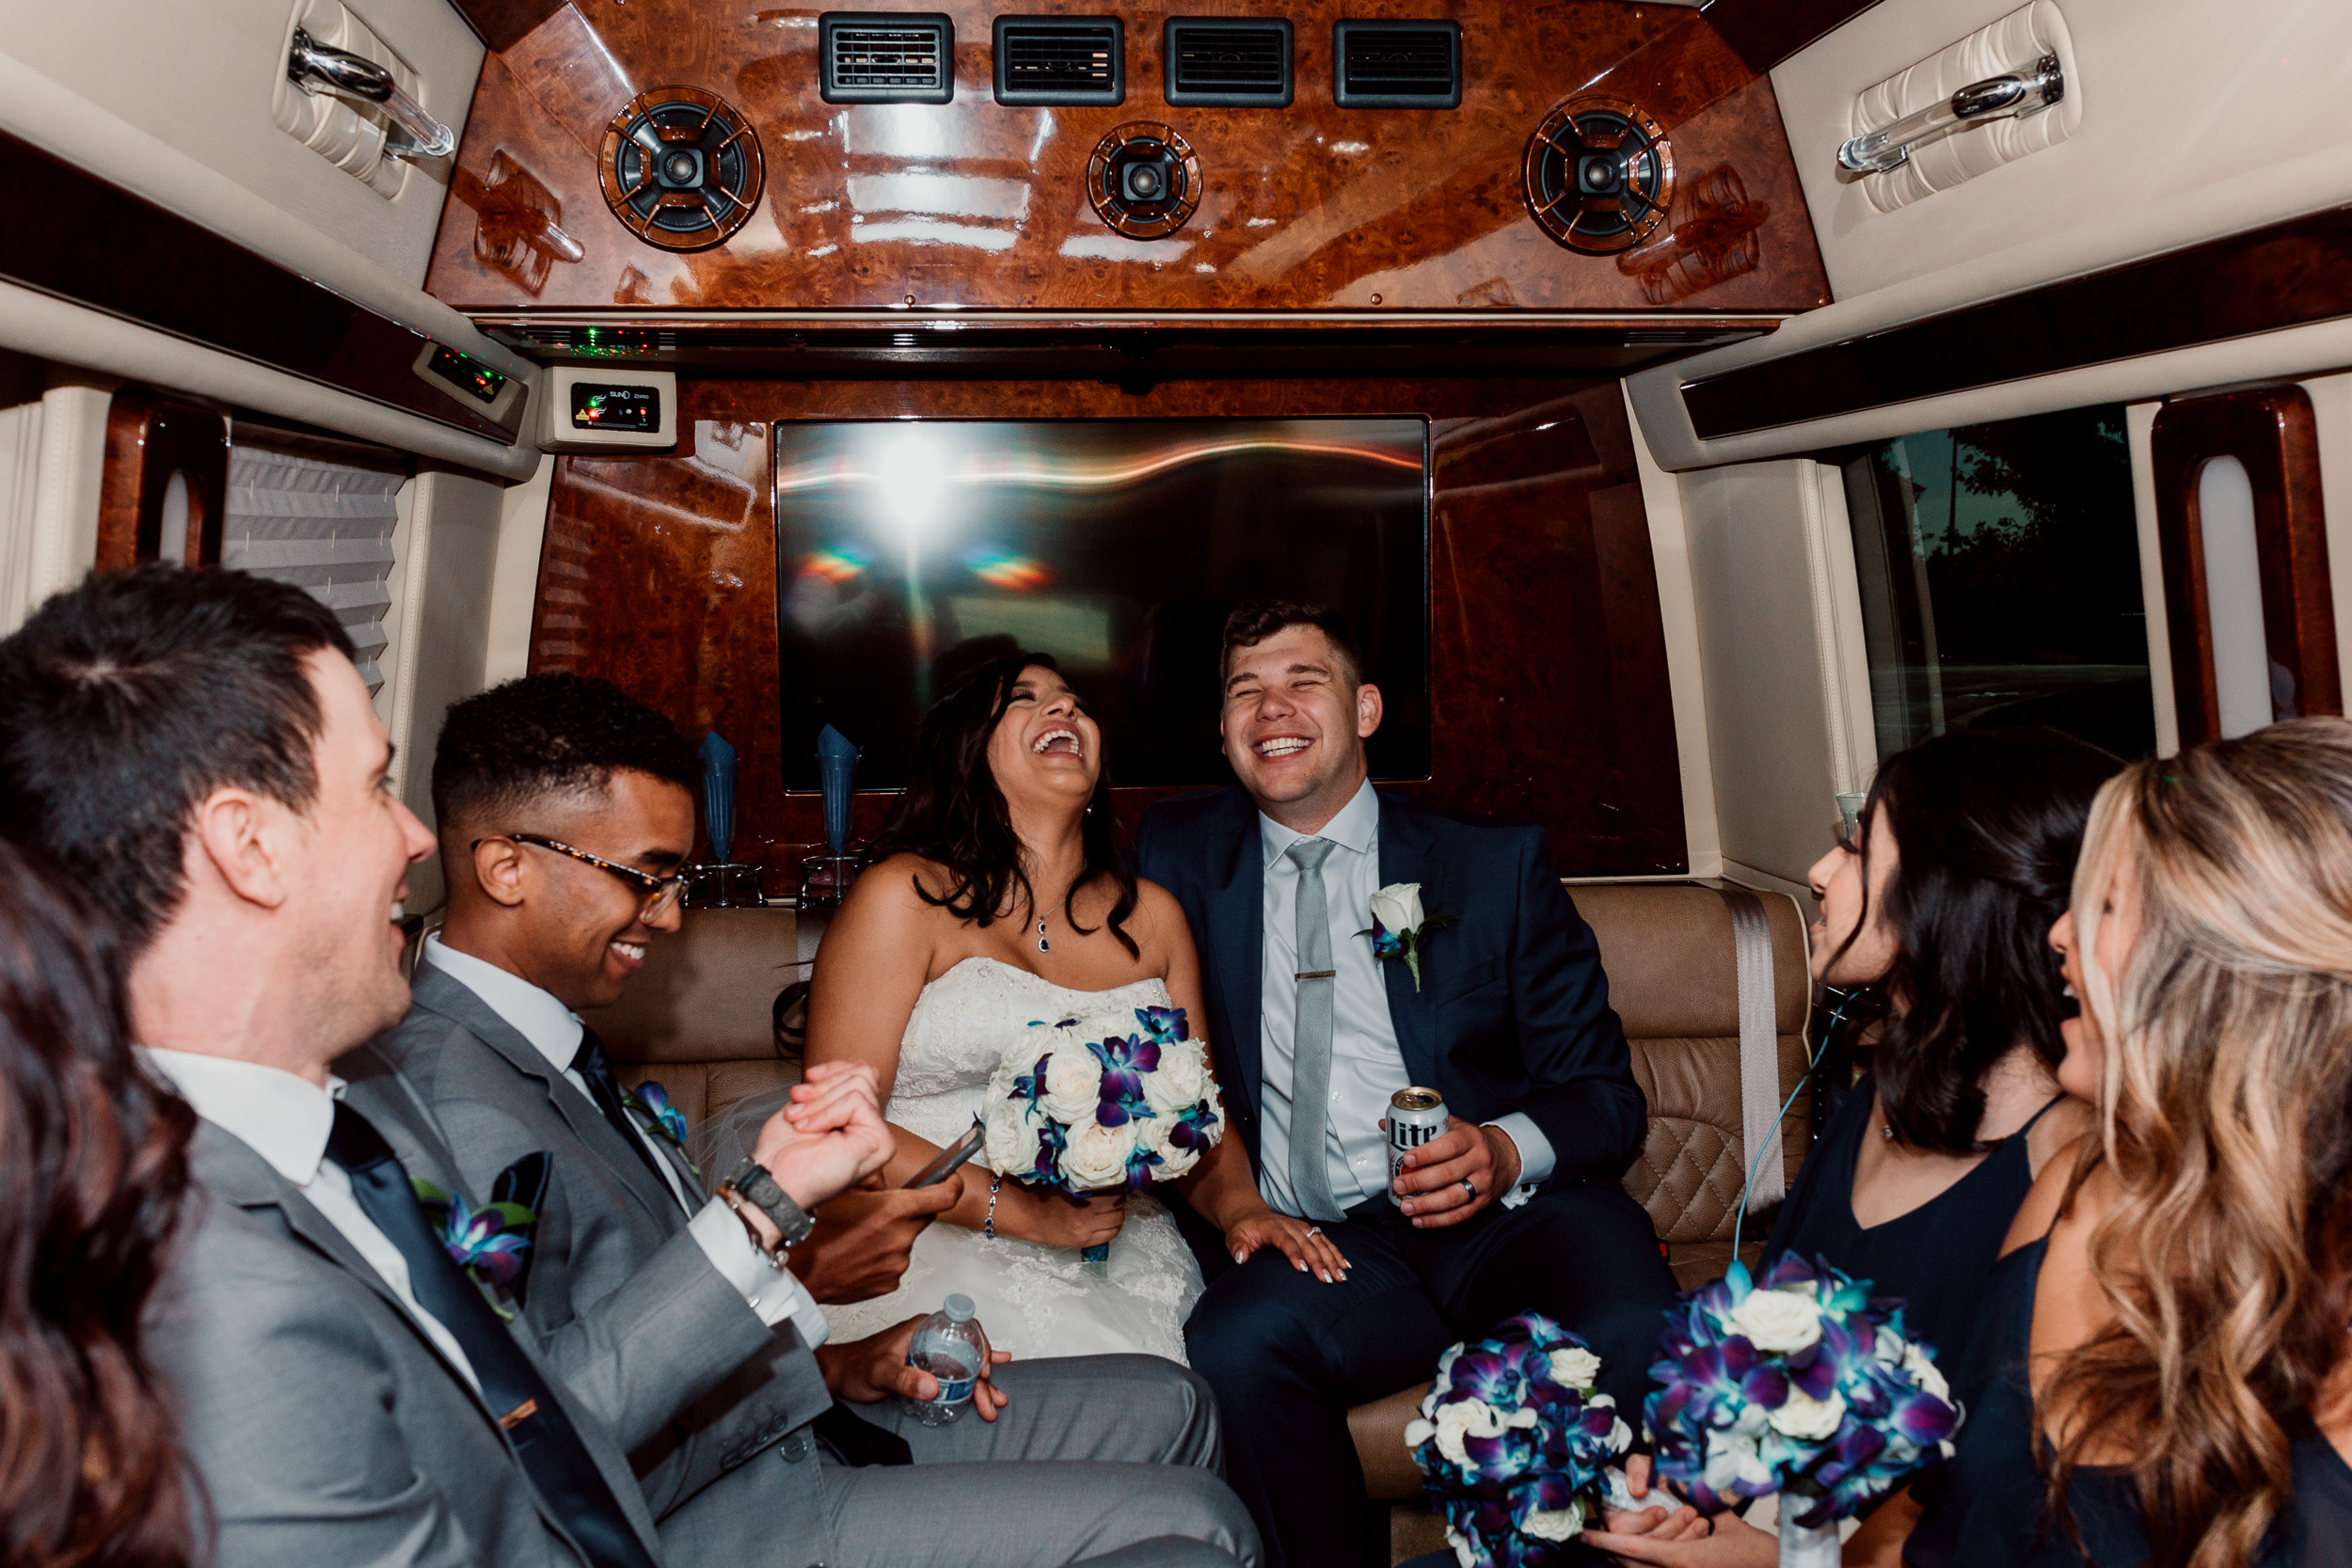 Chicago Backyard Wedding | Bolingbrook Wedding | Bolingbrook Elopement | Chicago Wedding Photographer | Wedding Tent | Chicago Elopement Photographer | Chicago Portrait Photographer | Bridal Party | Blue Wedding | Navy Blue Wedding | Small Weddings | Small Wedding Decorations | Bridal Party in Limo